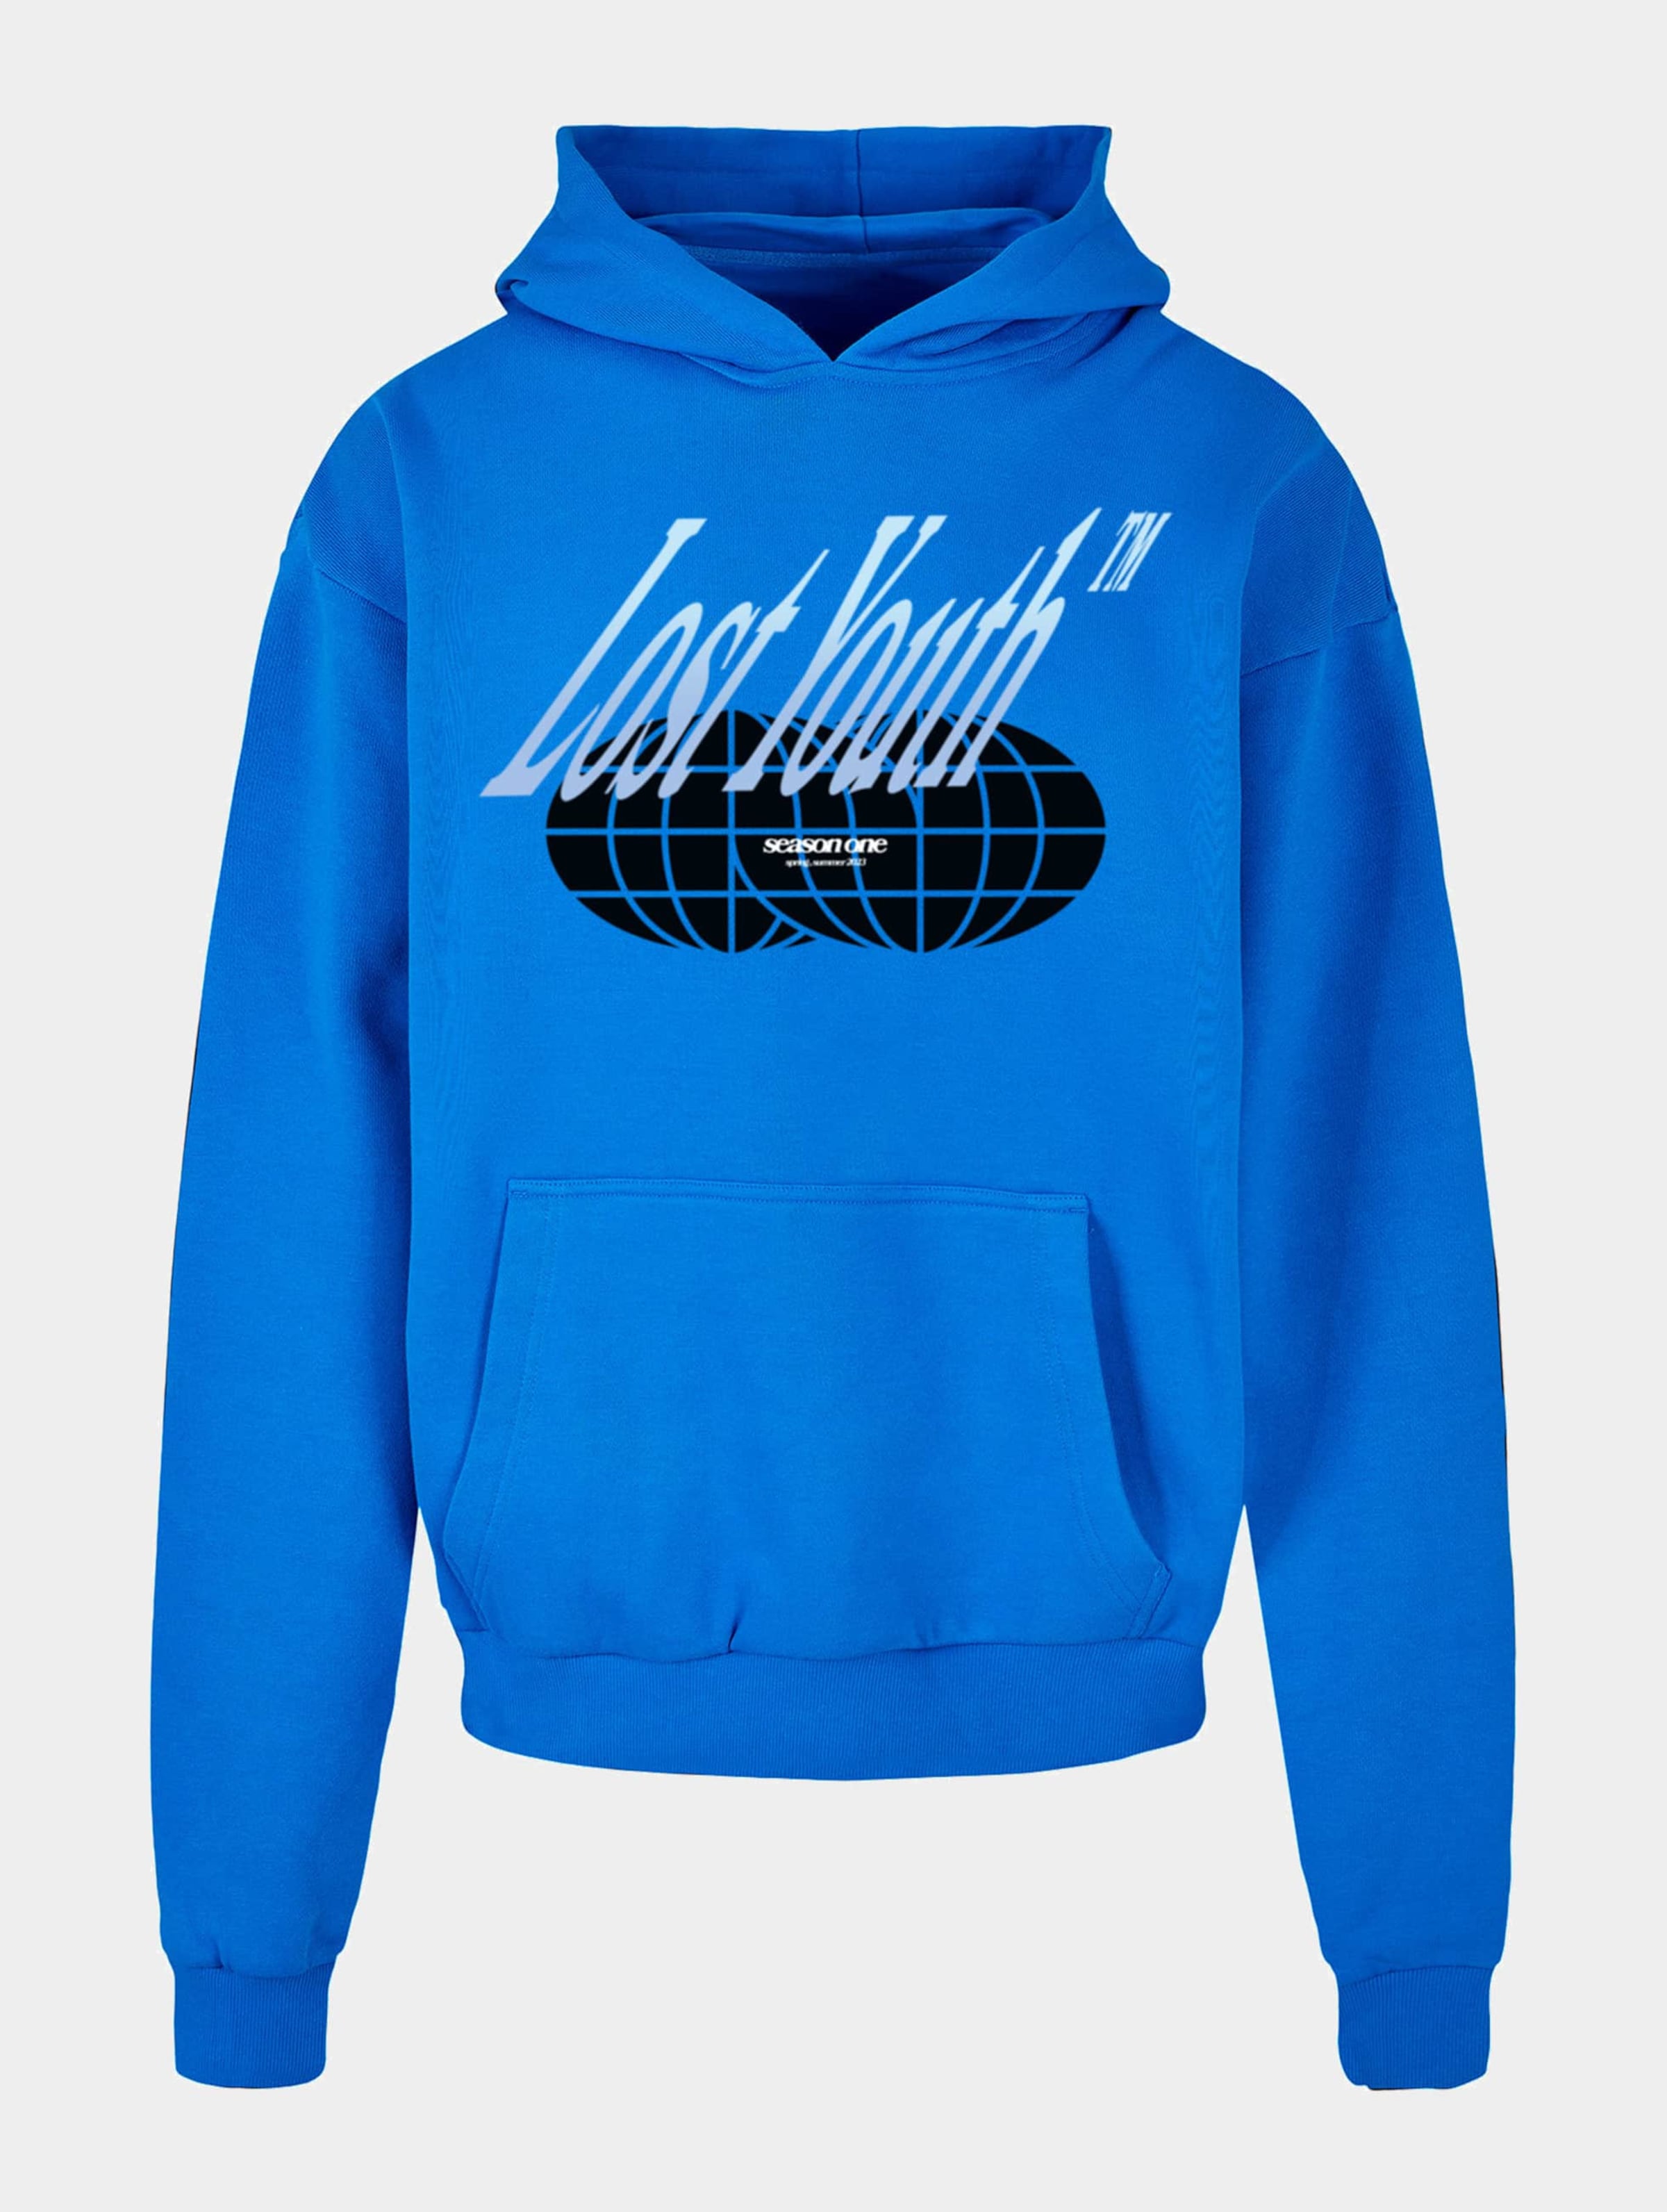 Lost Youth LY HOODY - ICON V.5 Mannen op kleur blauw, Maat 5XL